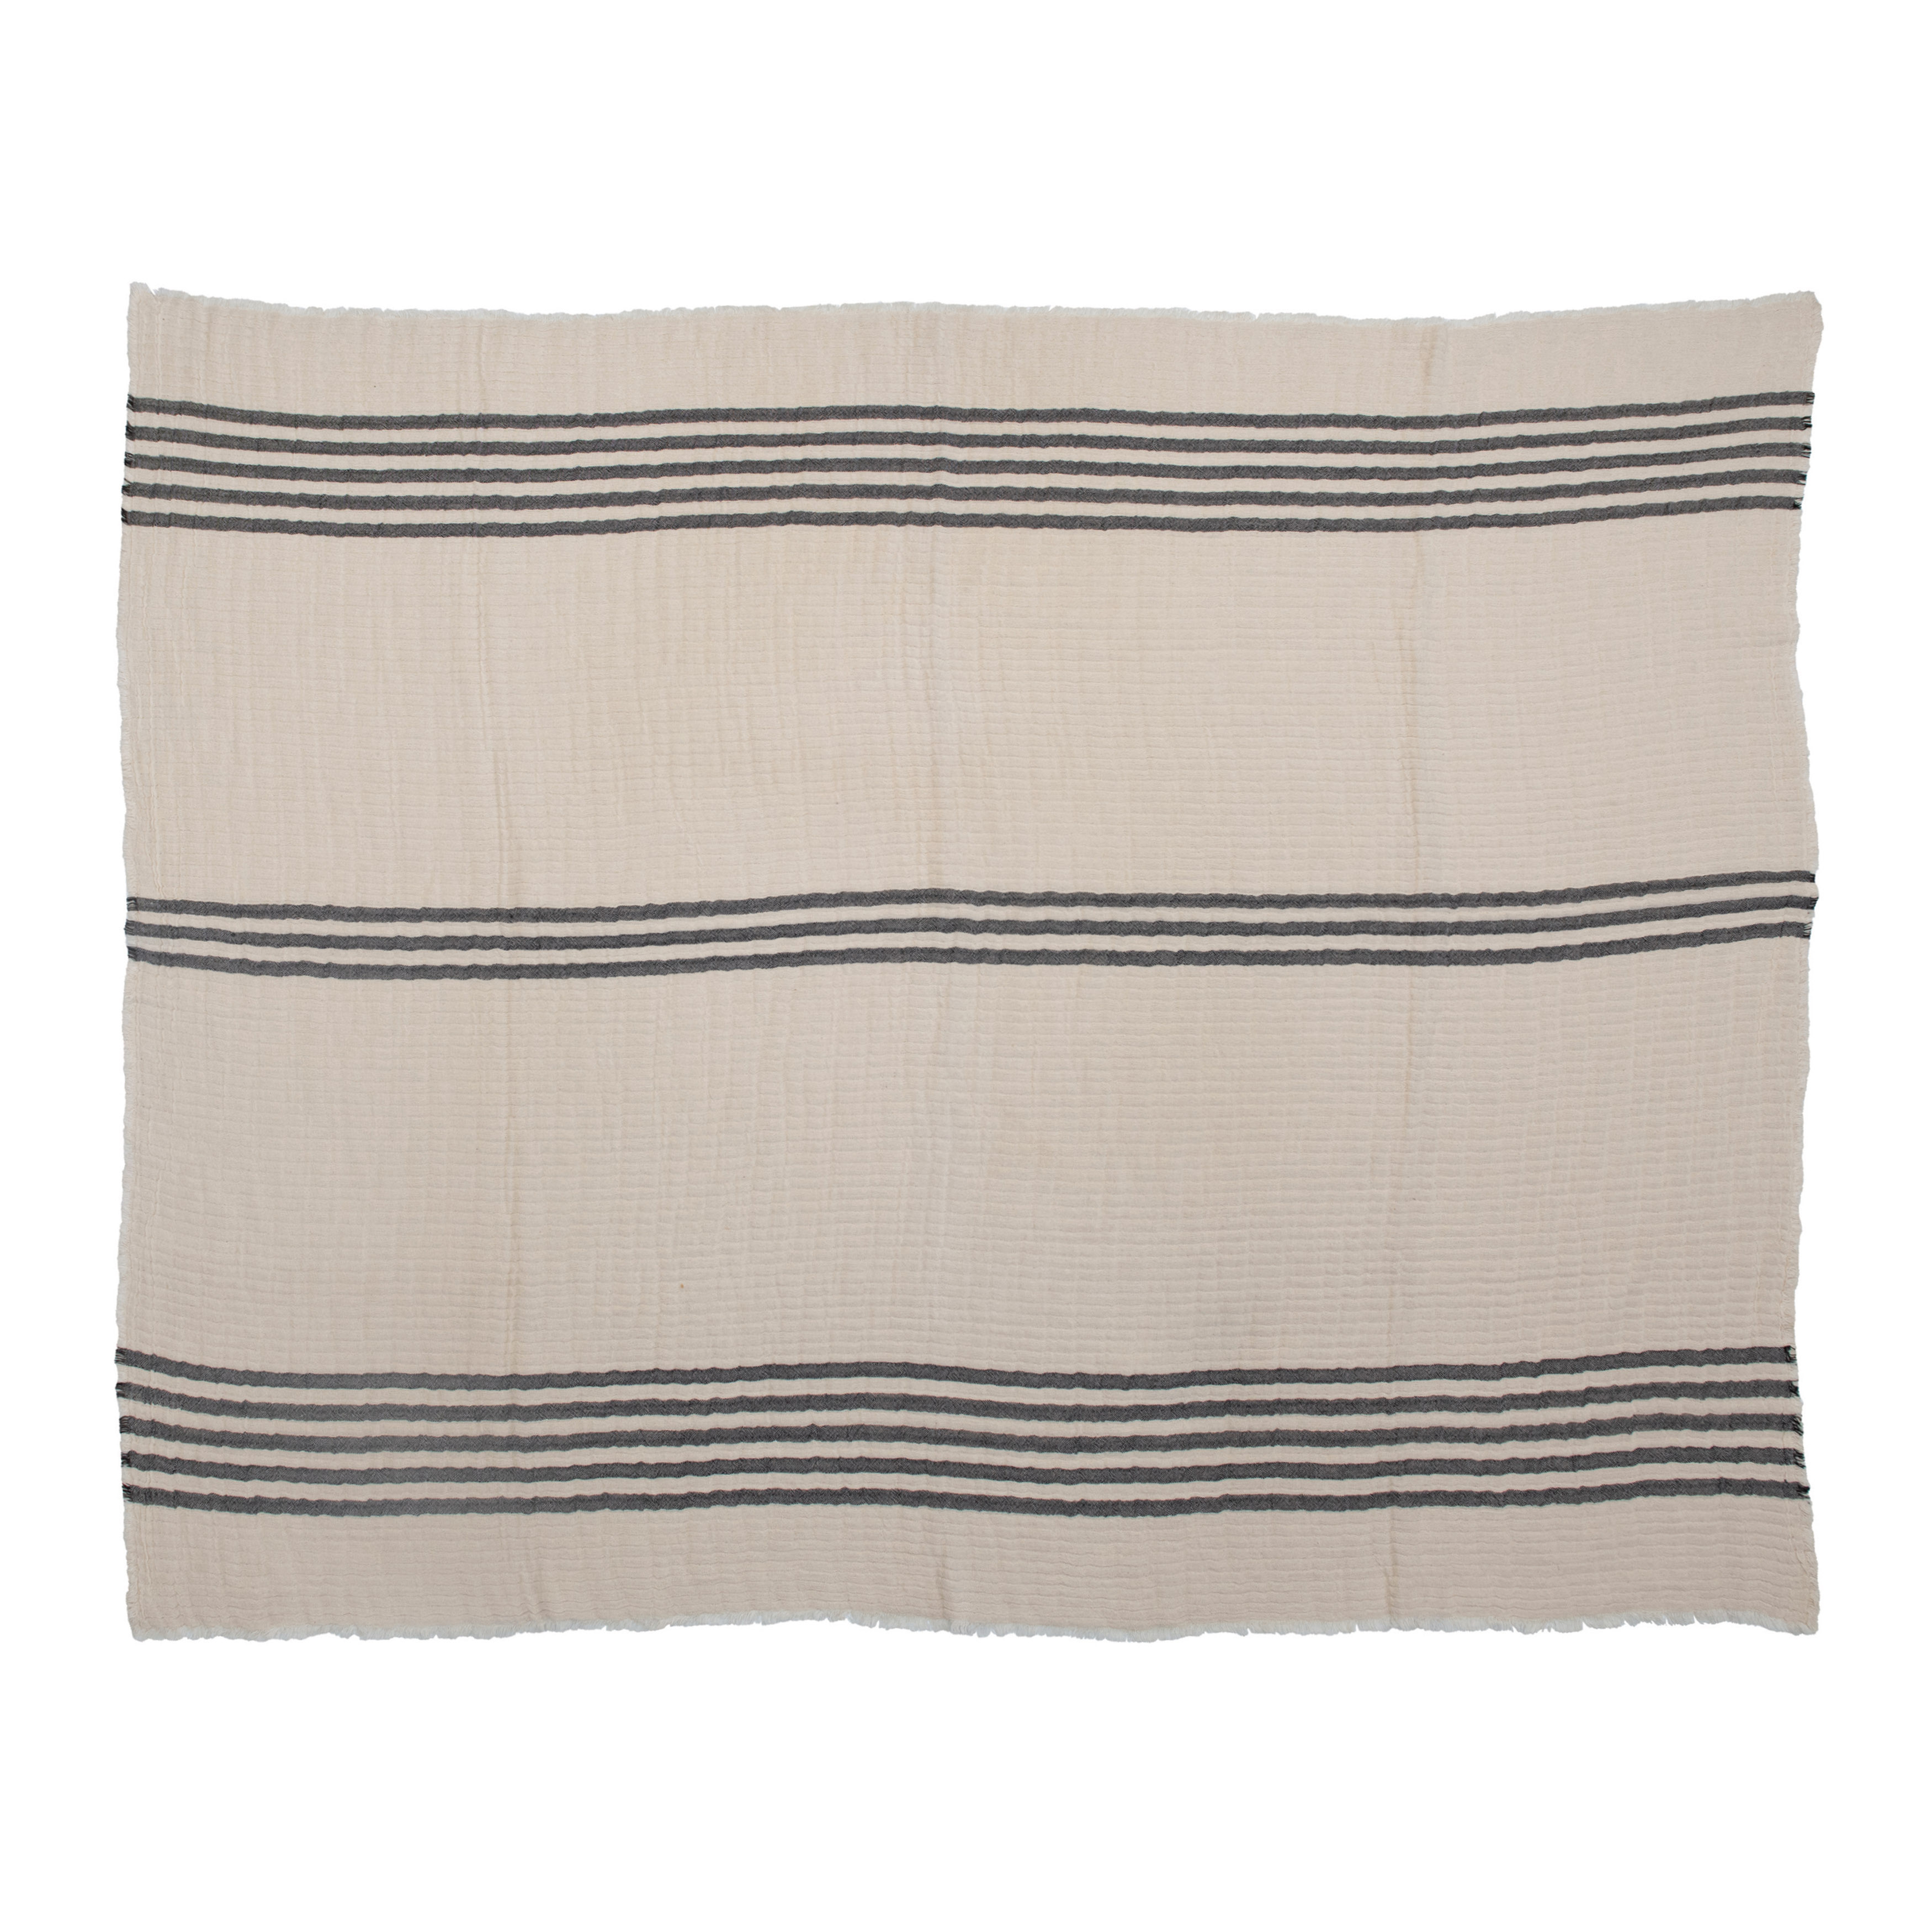 Coastal Stripe Double Cloth Stitched Throw Blanket - Nomad Home